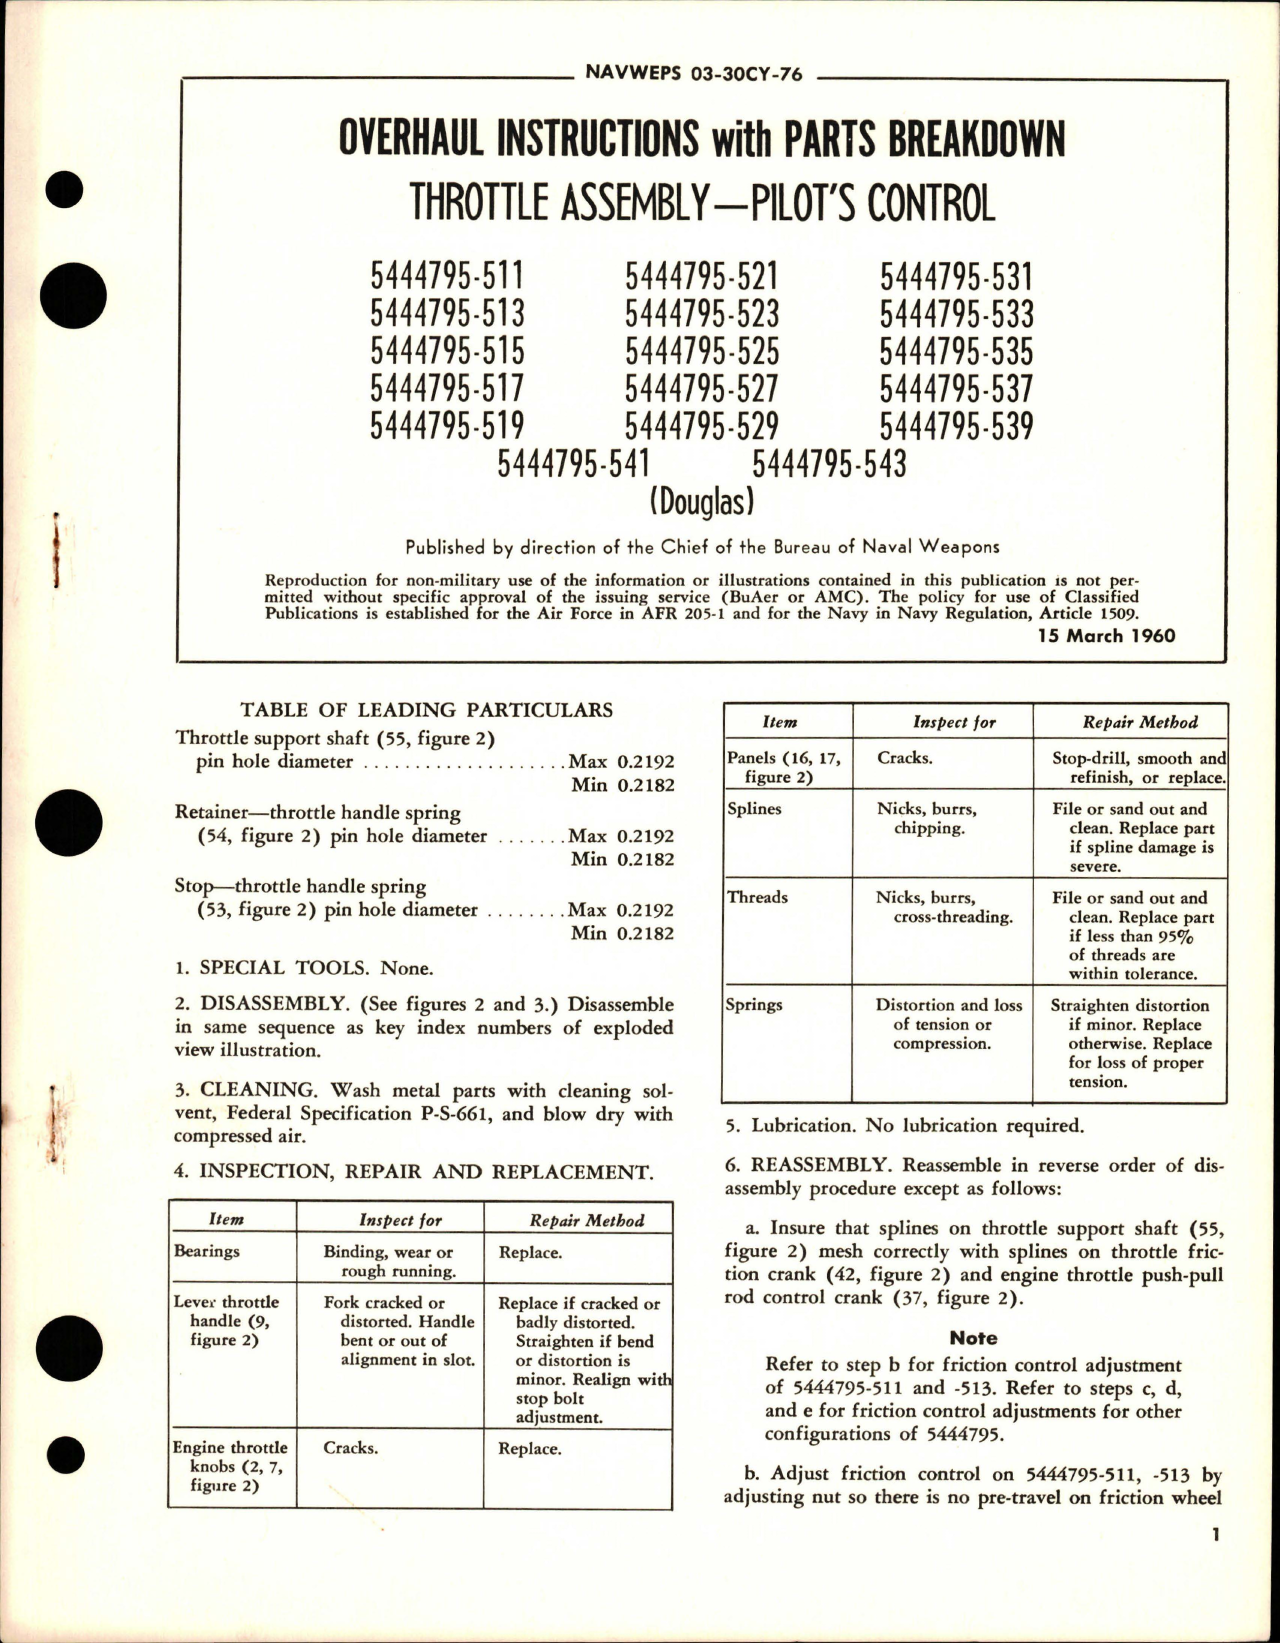 Sample page 1 from AirCorps Library document: Overhaul Instructions with Parts Breakdown for Pilot's Control Throttle Assembly